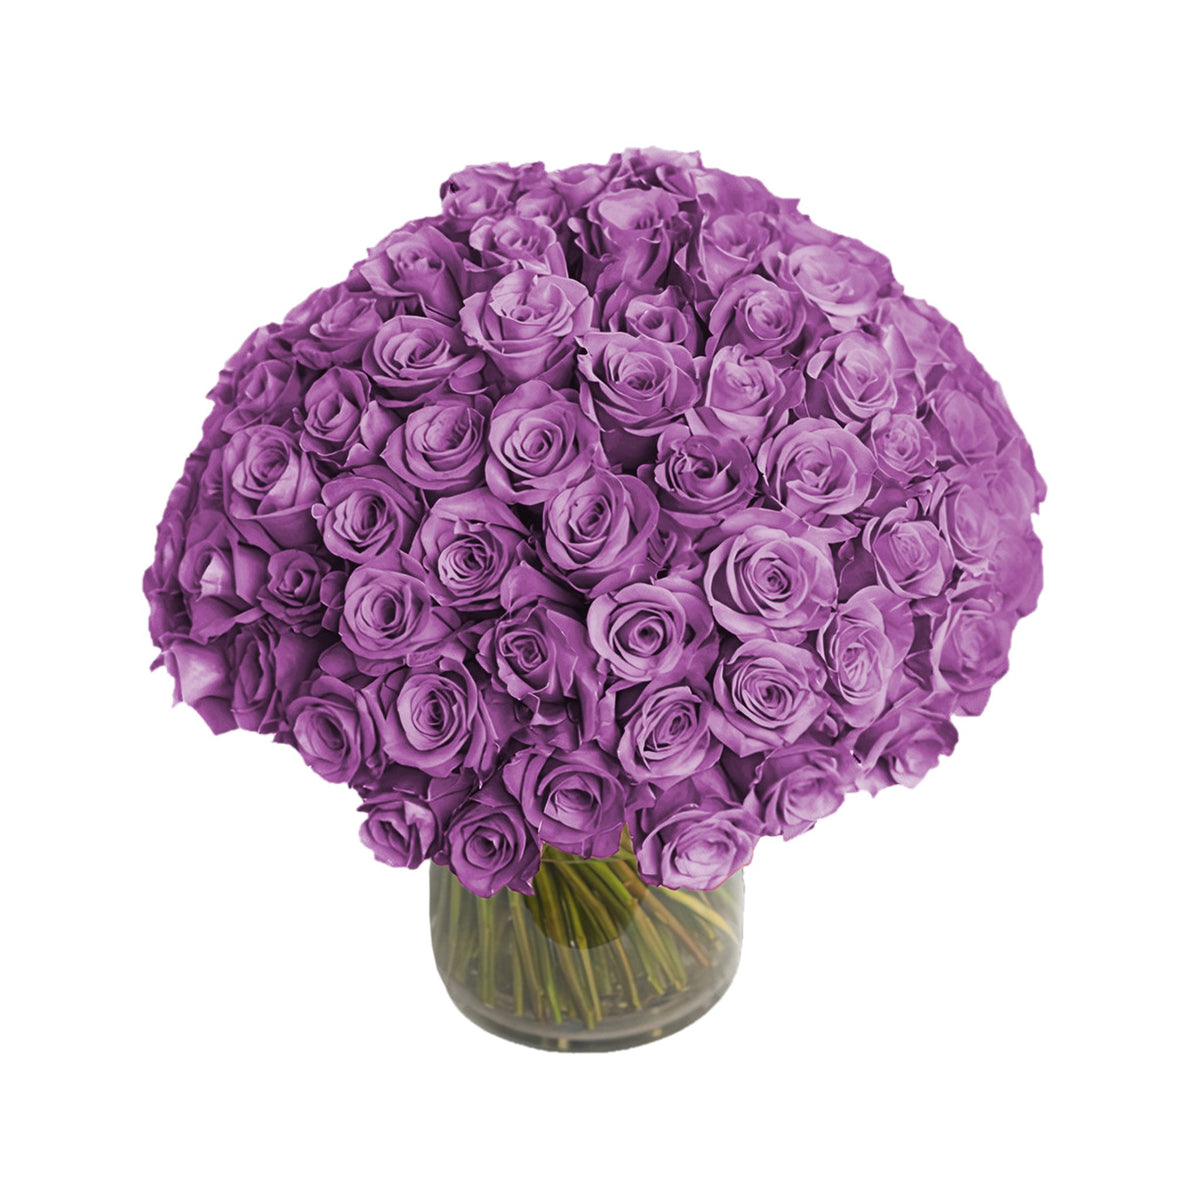 NYC Flower Delivery - Fresh Roses in a Crystal Vase | Purple - 100 Roses - Roses